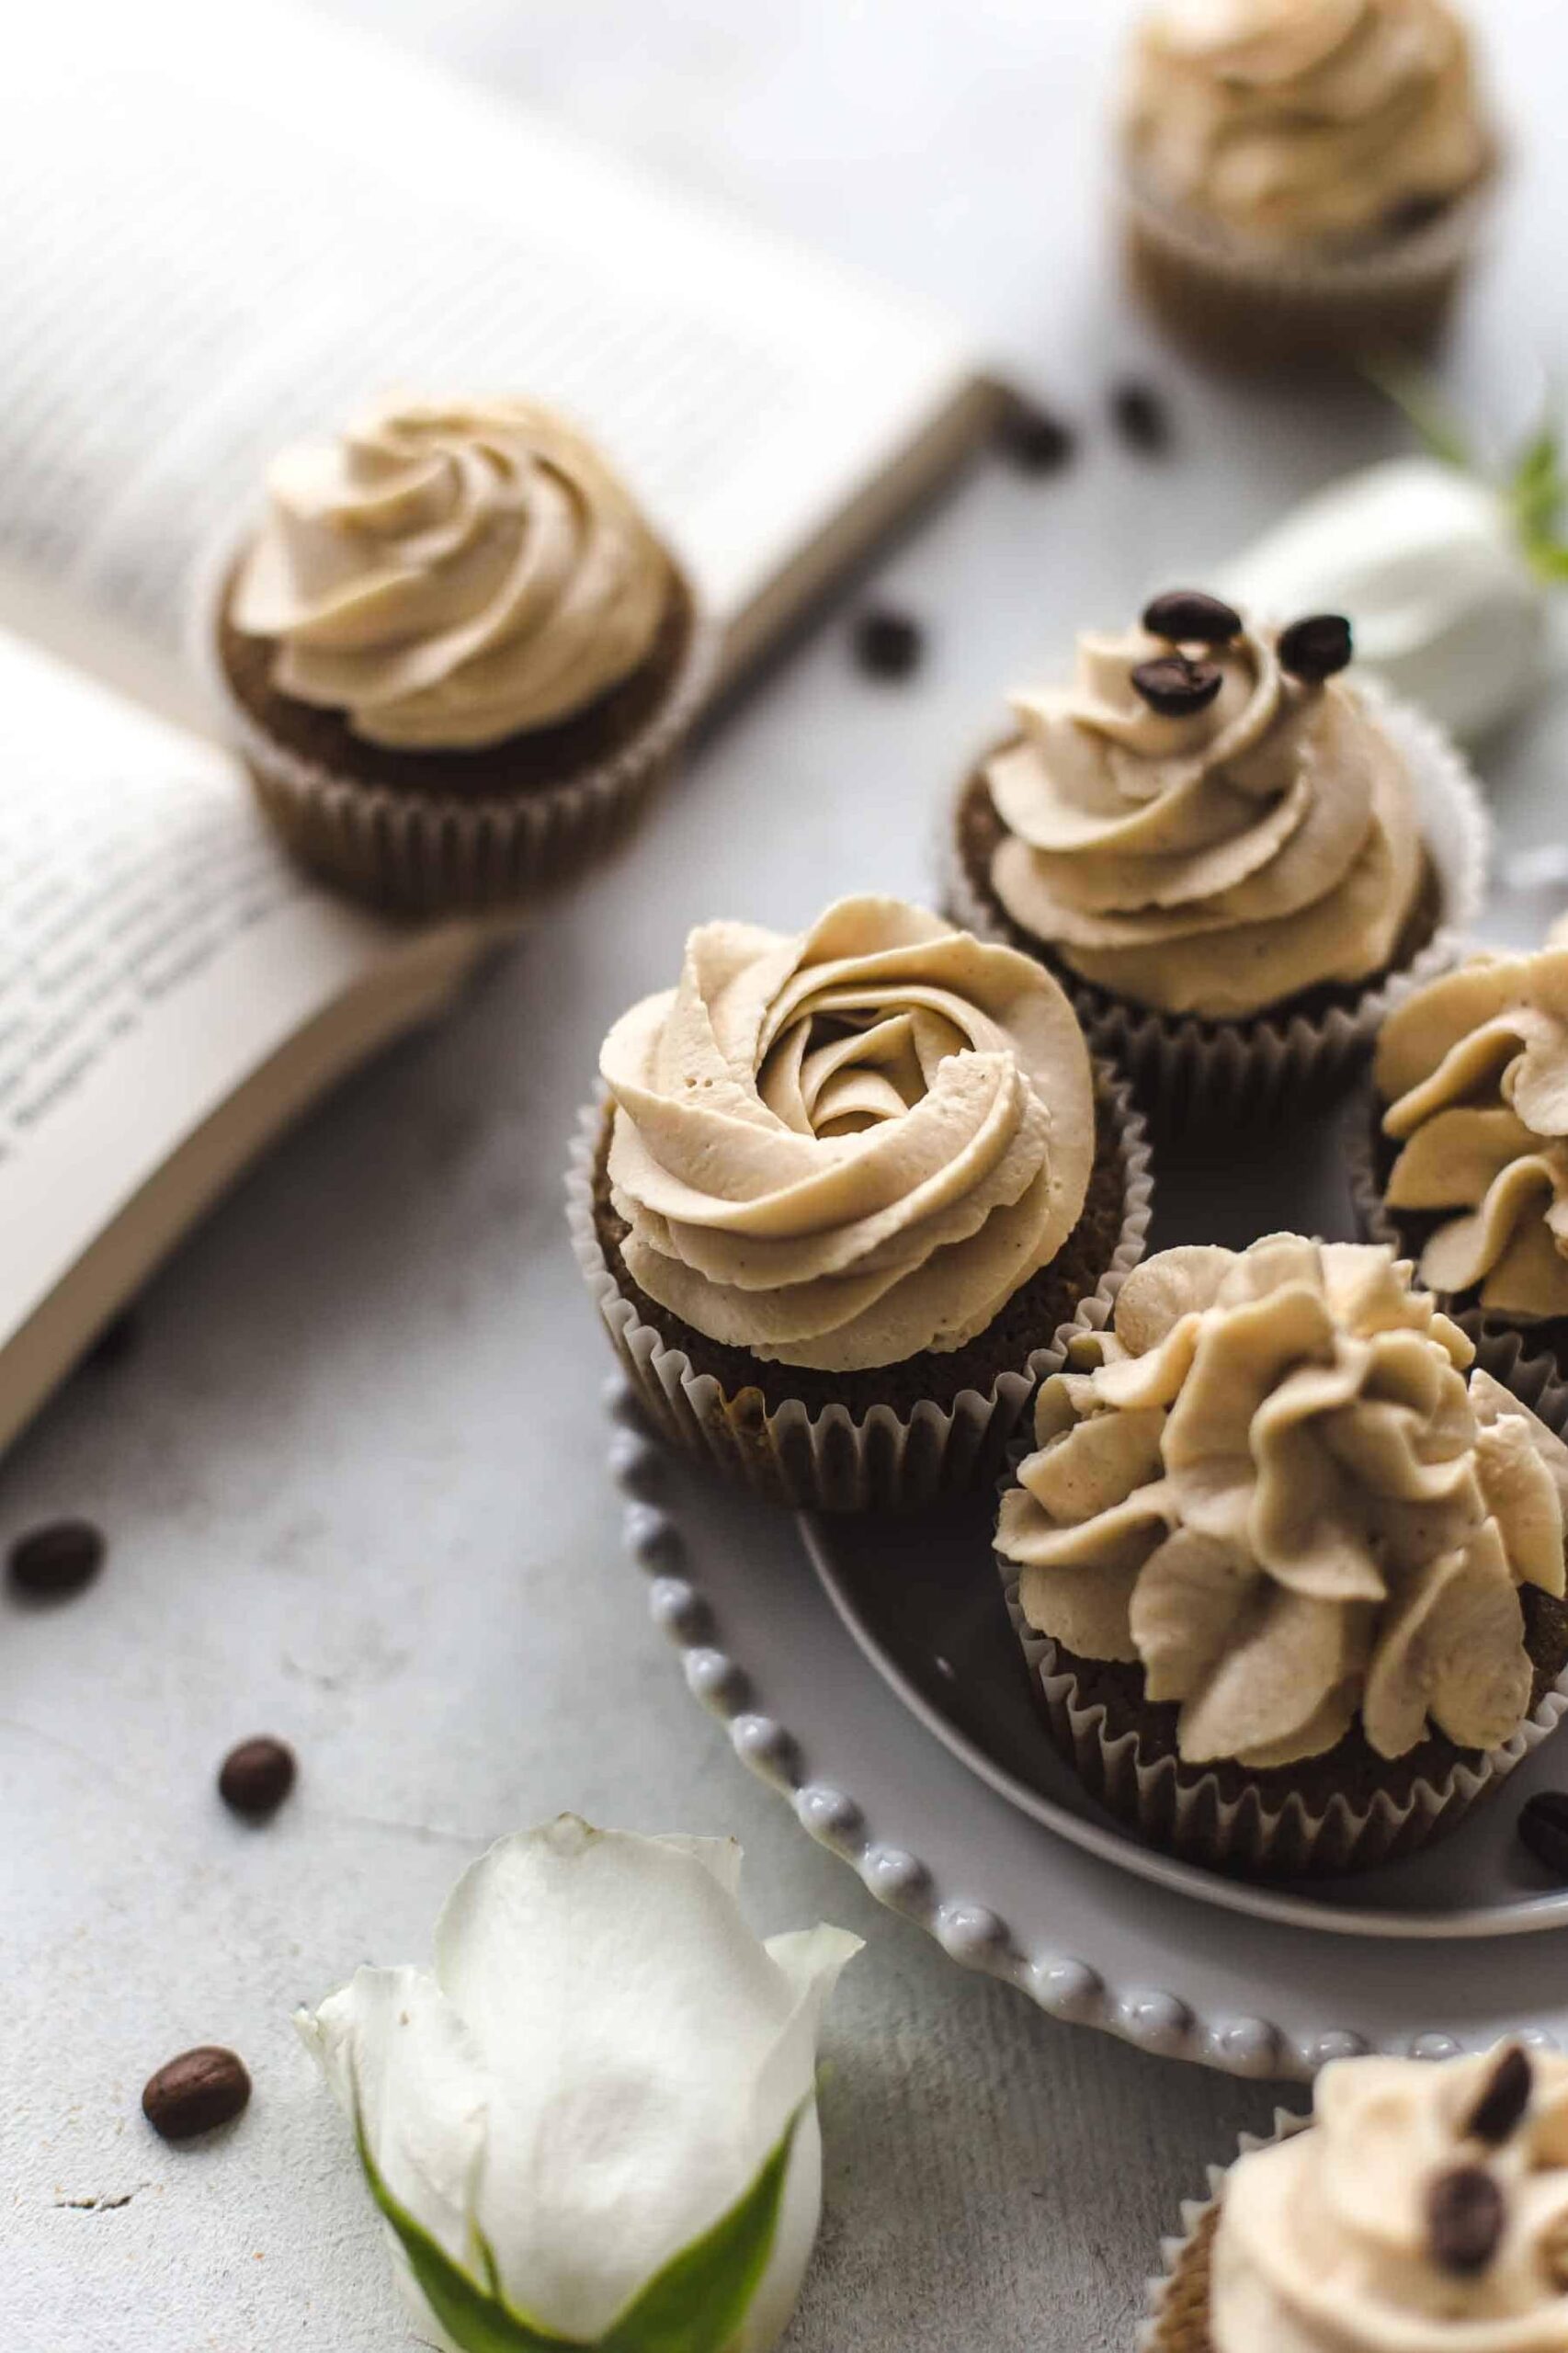  No need to choose between a cappuccino and a cupcake, have them both in one bite.